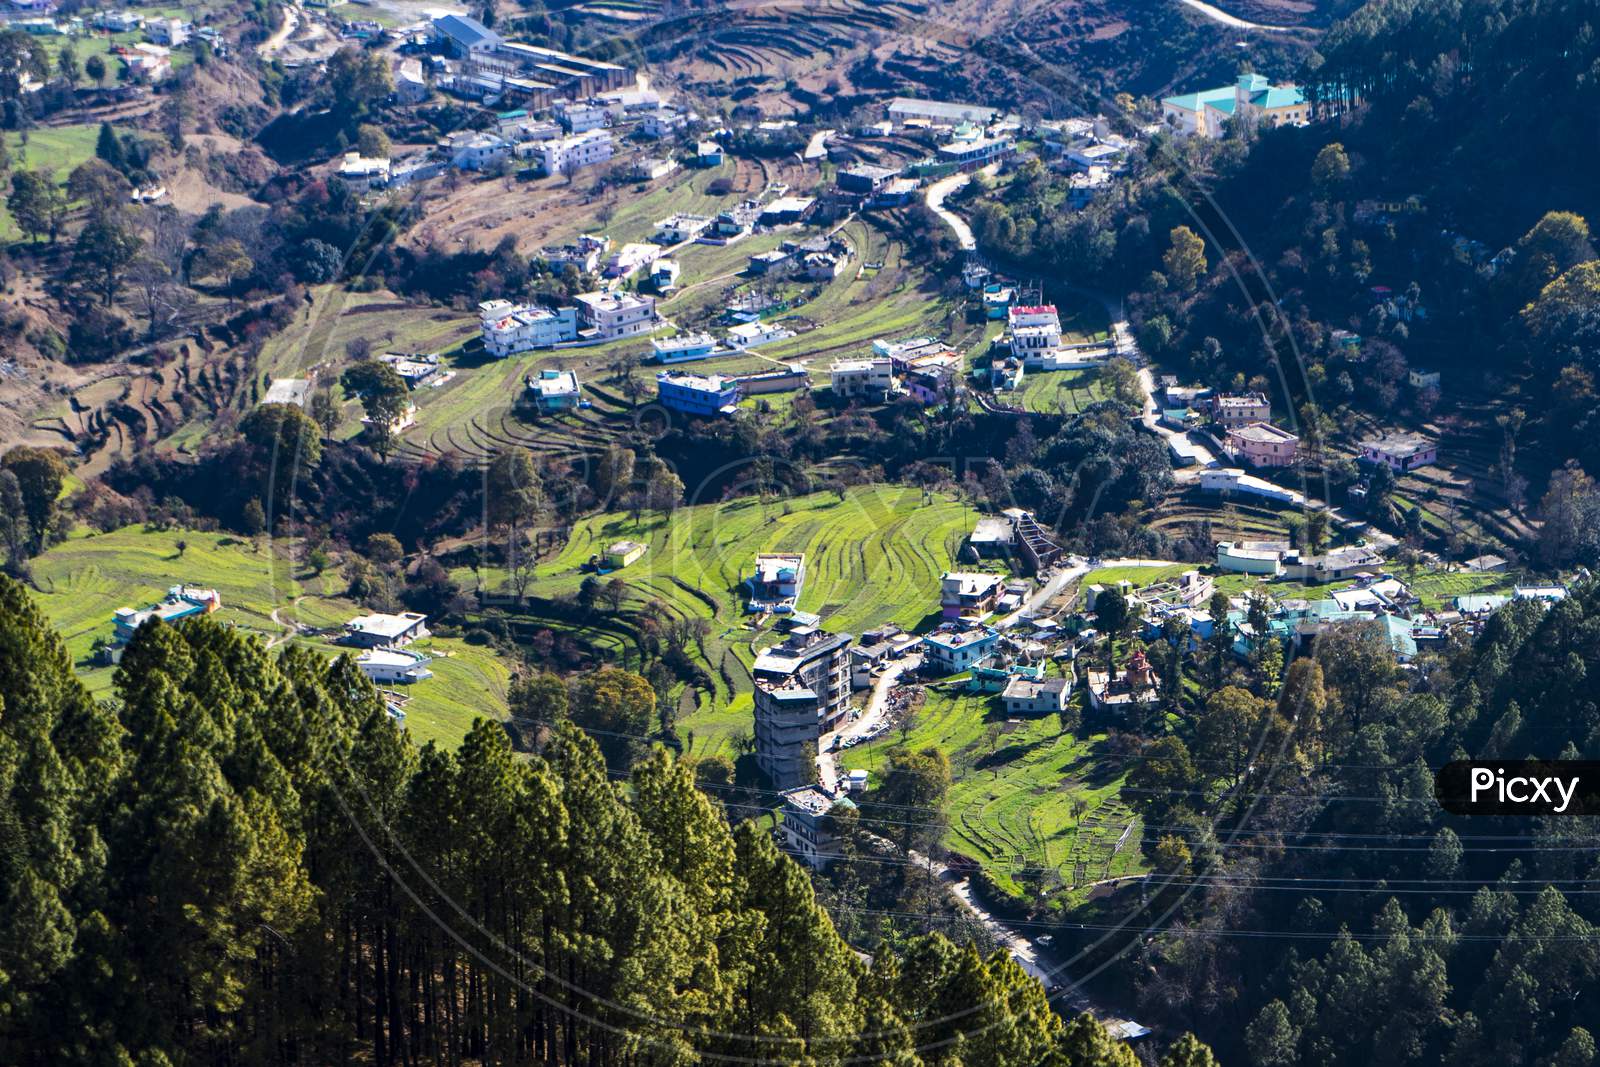 Aerial View Of The City Of Pithoragarh, Situated In The Mountains Of Uttarakhand.